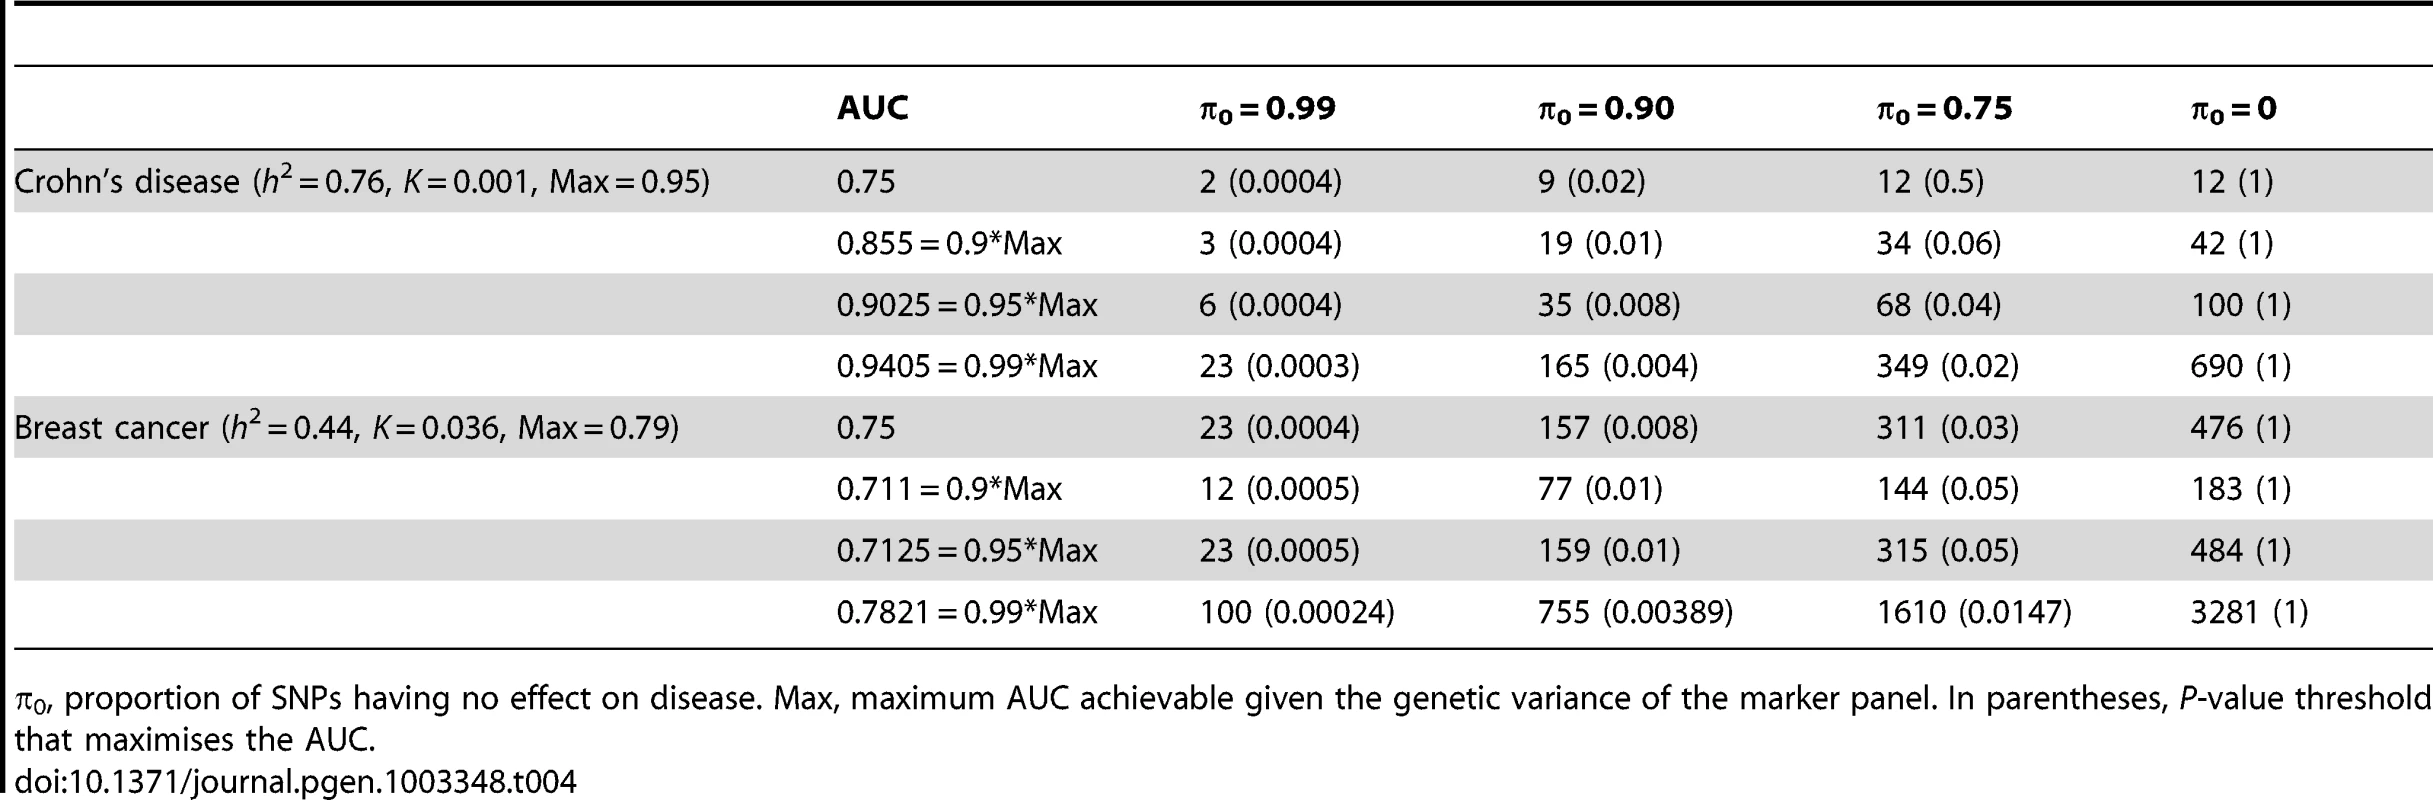 Numbers of cases and controls (in 1000s of each, rounded up) required to attain a specified AUC using a panel of 100,000 markers that explains half the heritability of liability.